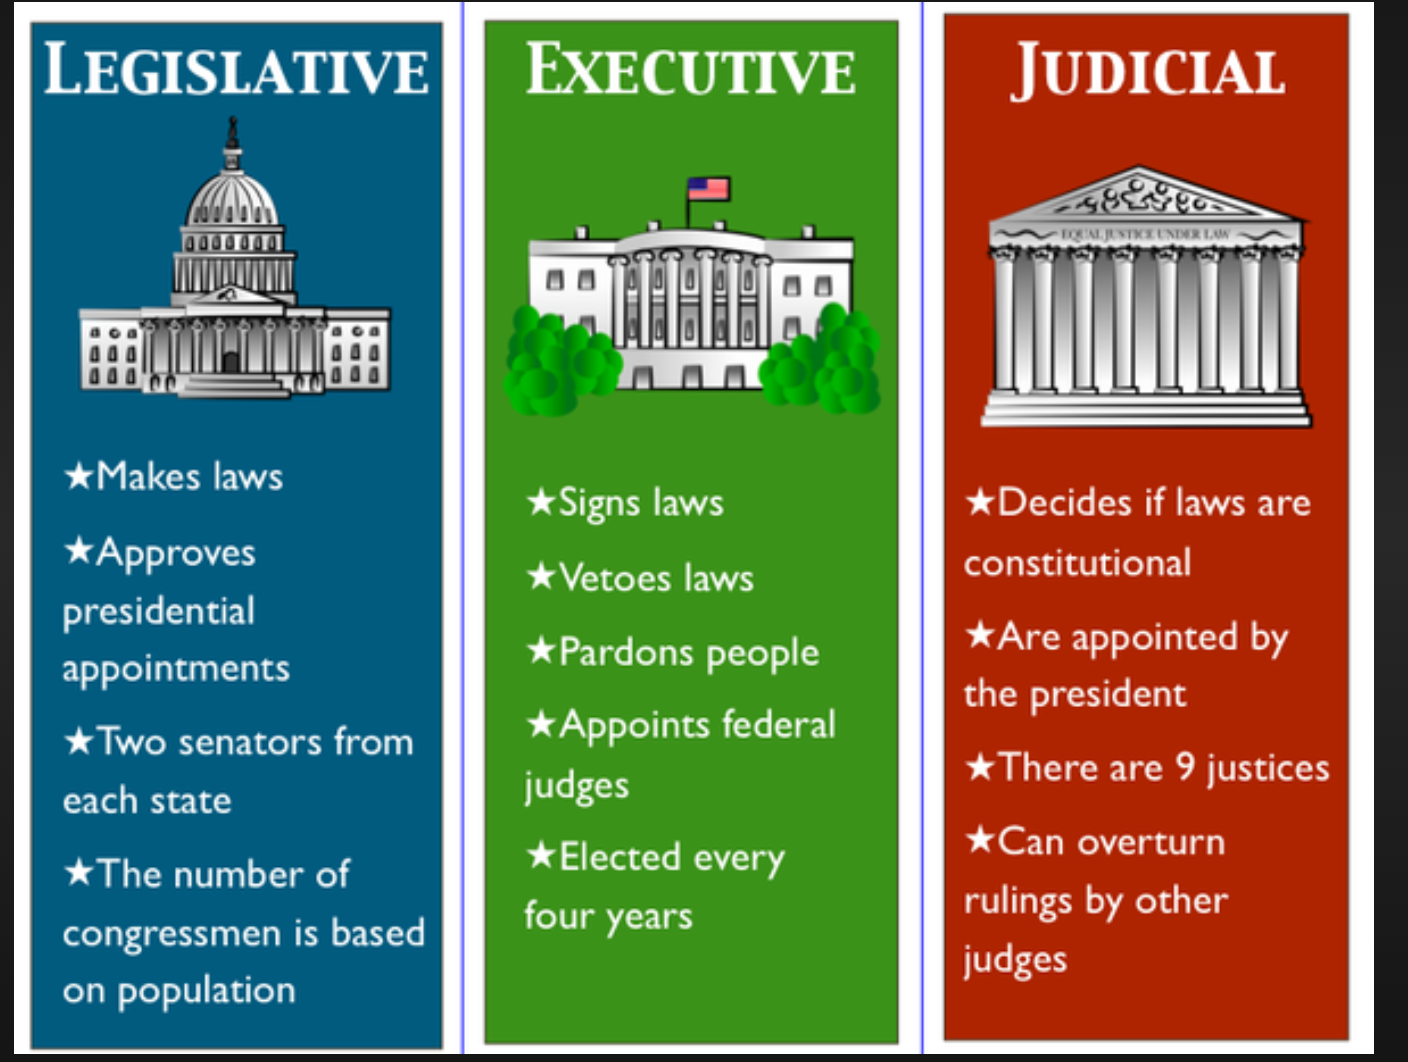 Forms of power. Three Branches of government. Разделение властей США на английском. Branches of Power in the USA. Legislative Executive and Judicial.